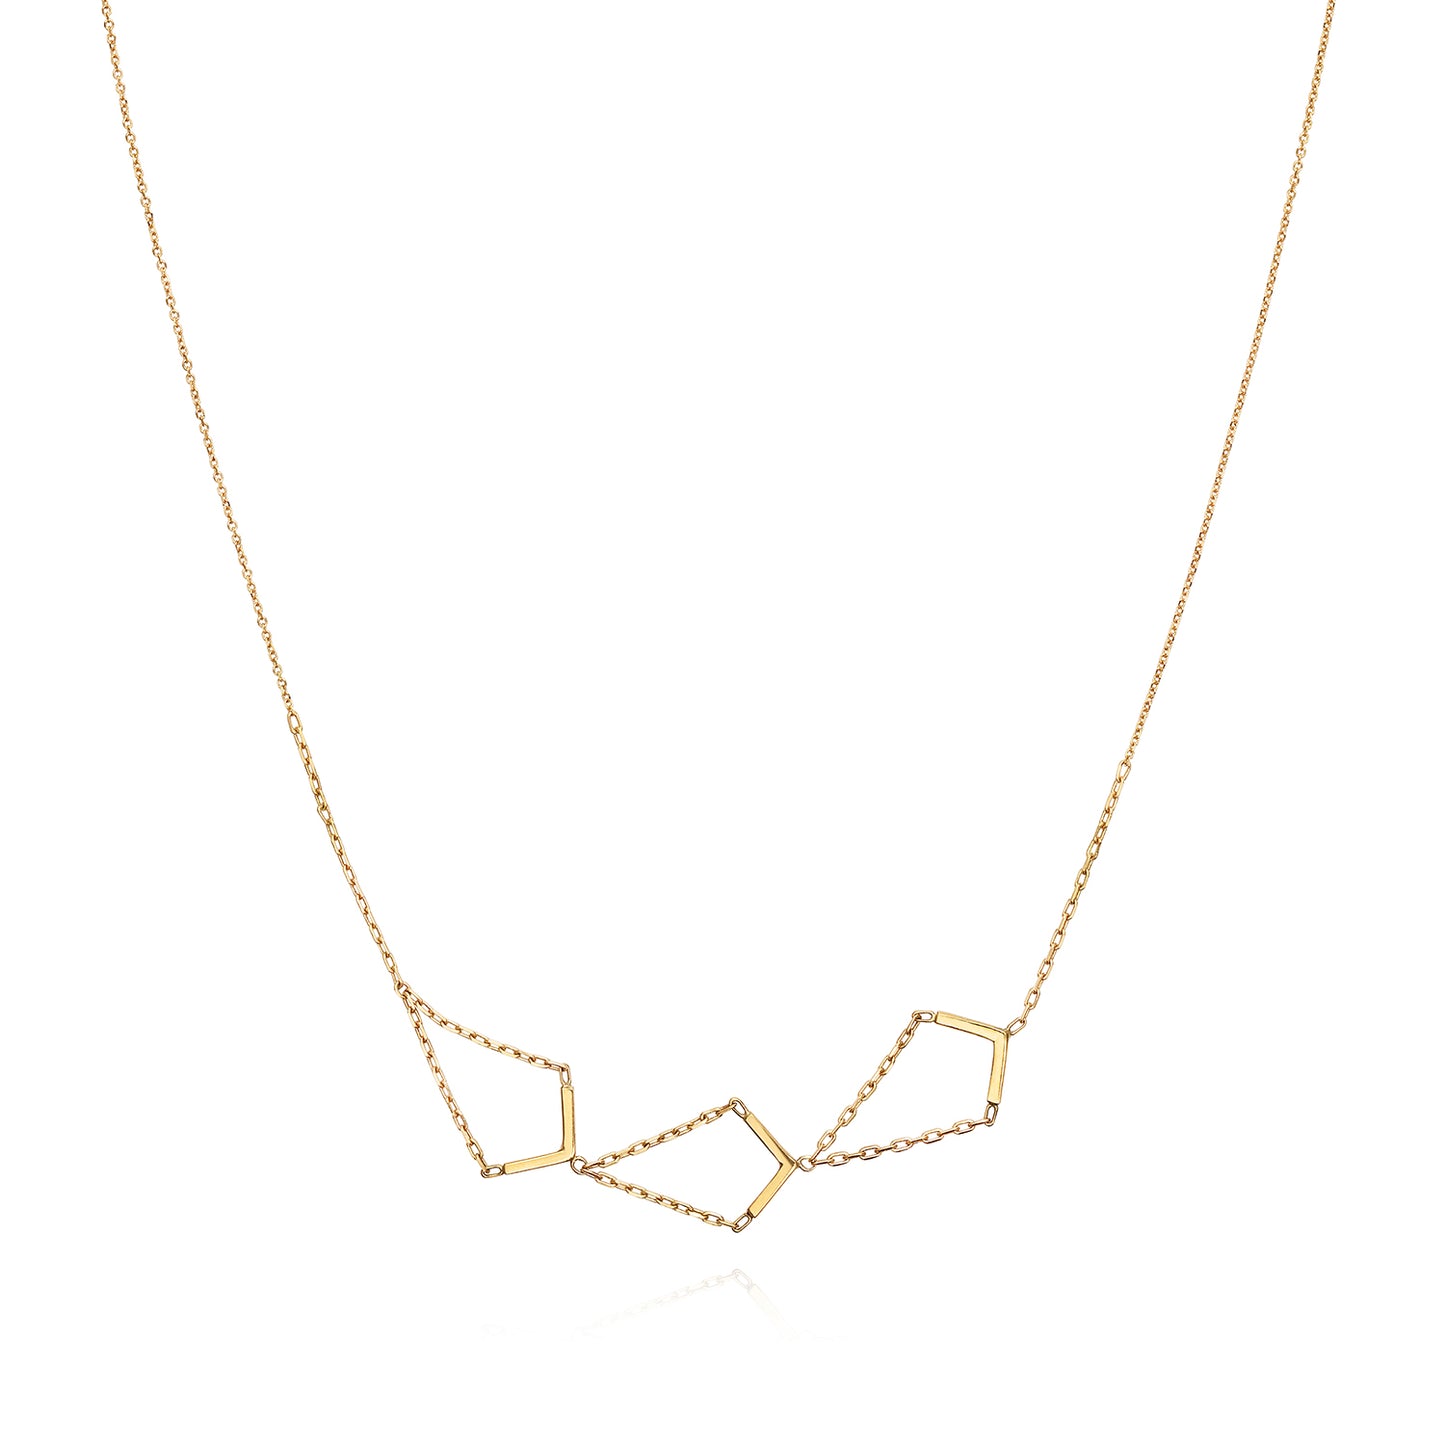 18ct yellow gold necklace with section of 3 V-shapes 